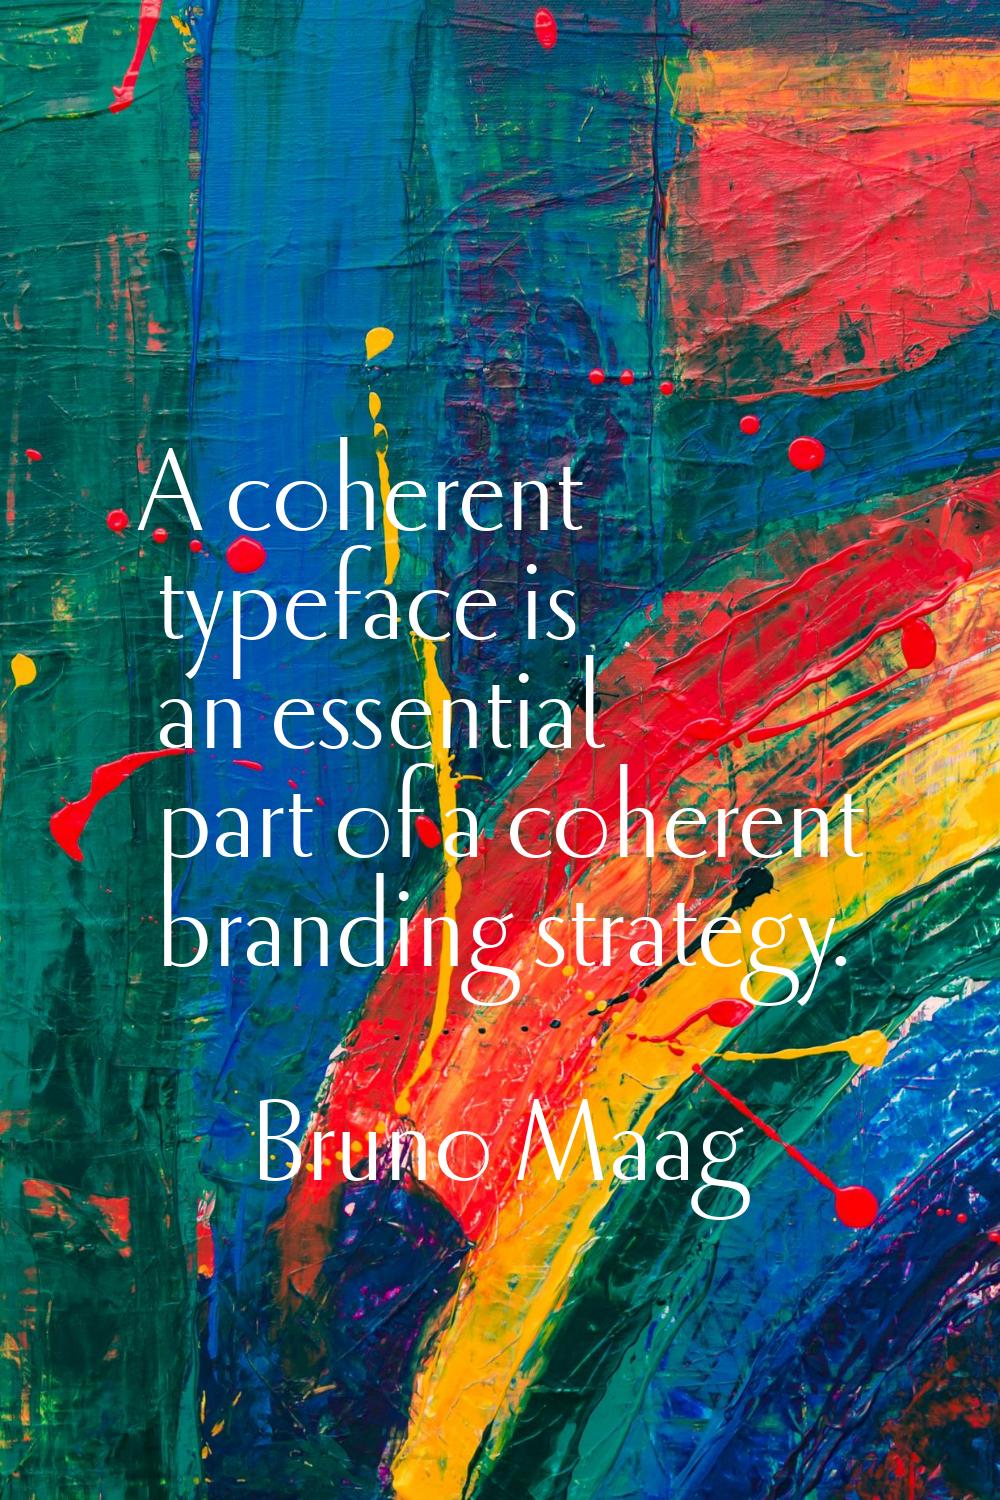 A coherent typeface is an essential part of a coherent branding strategy.